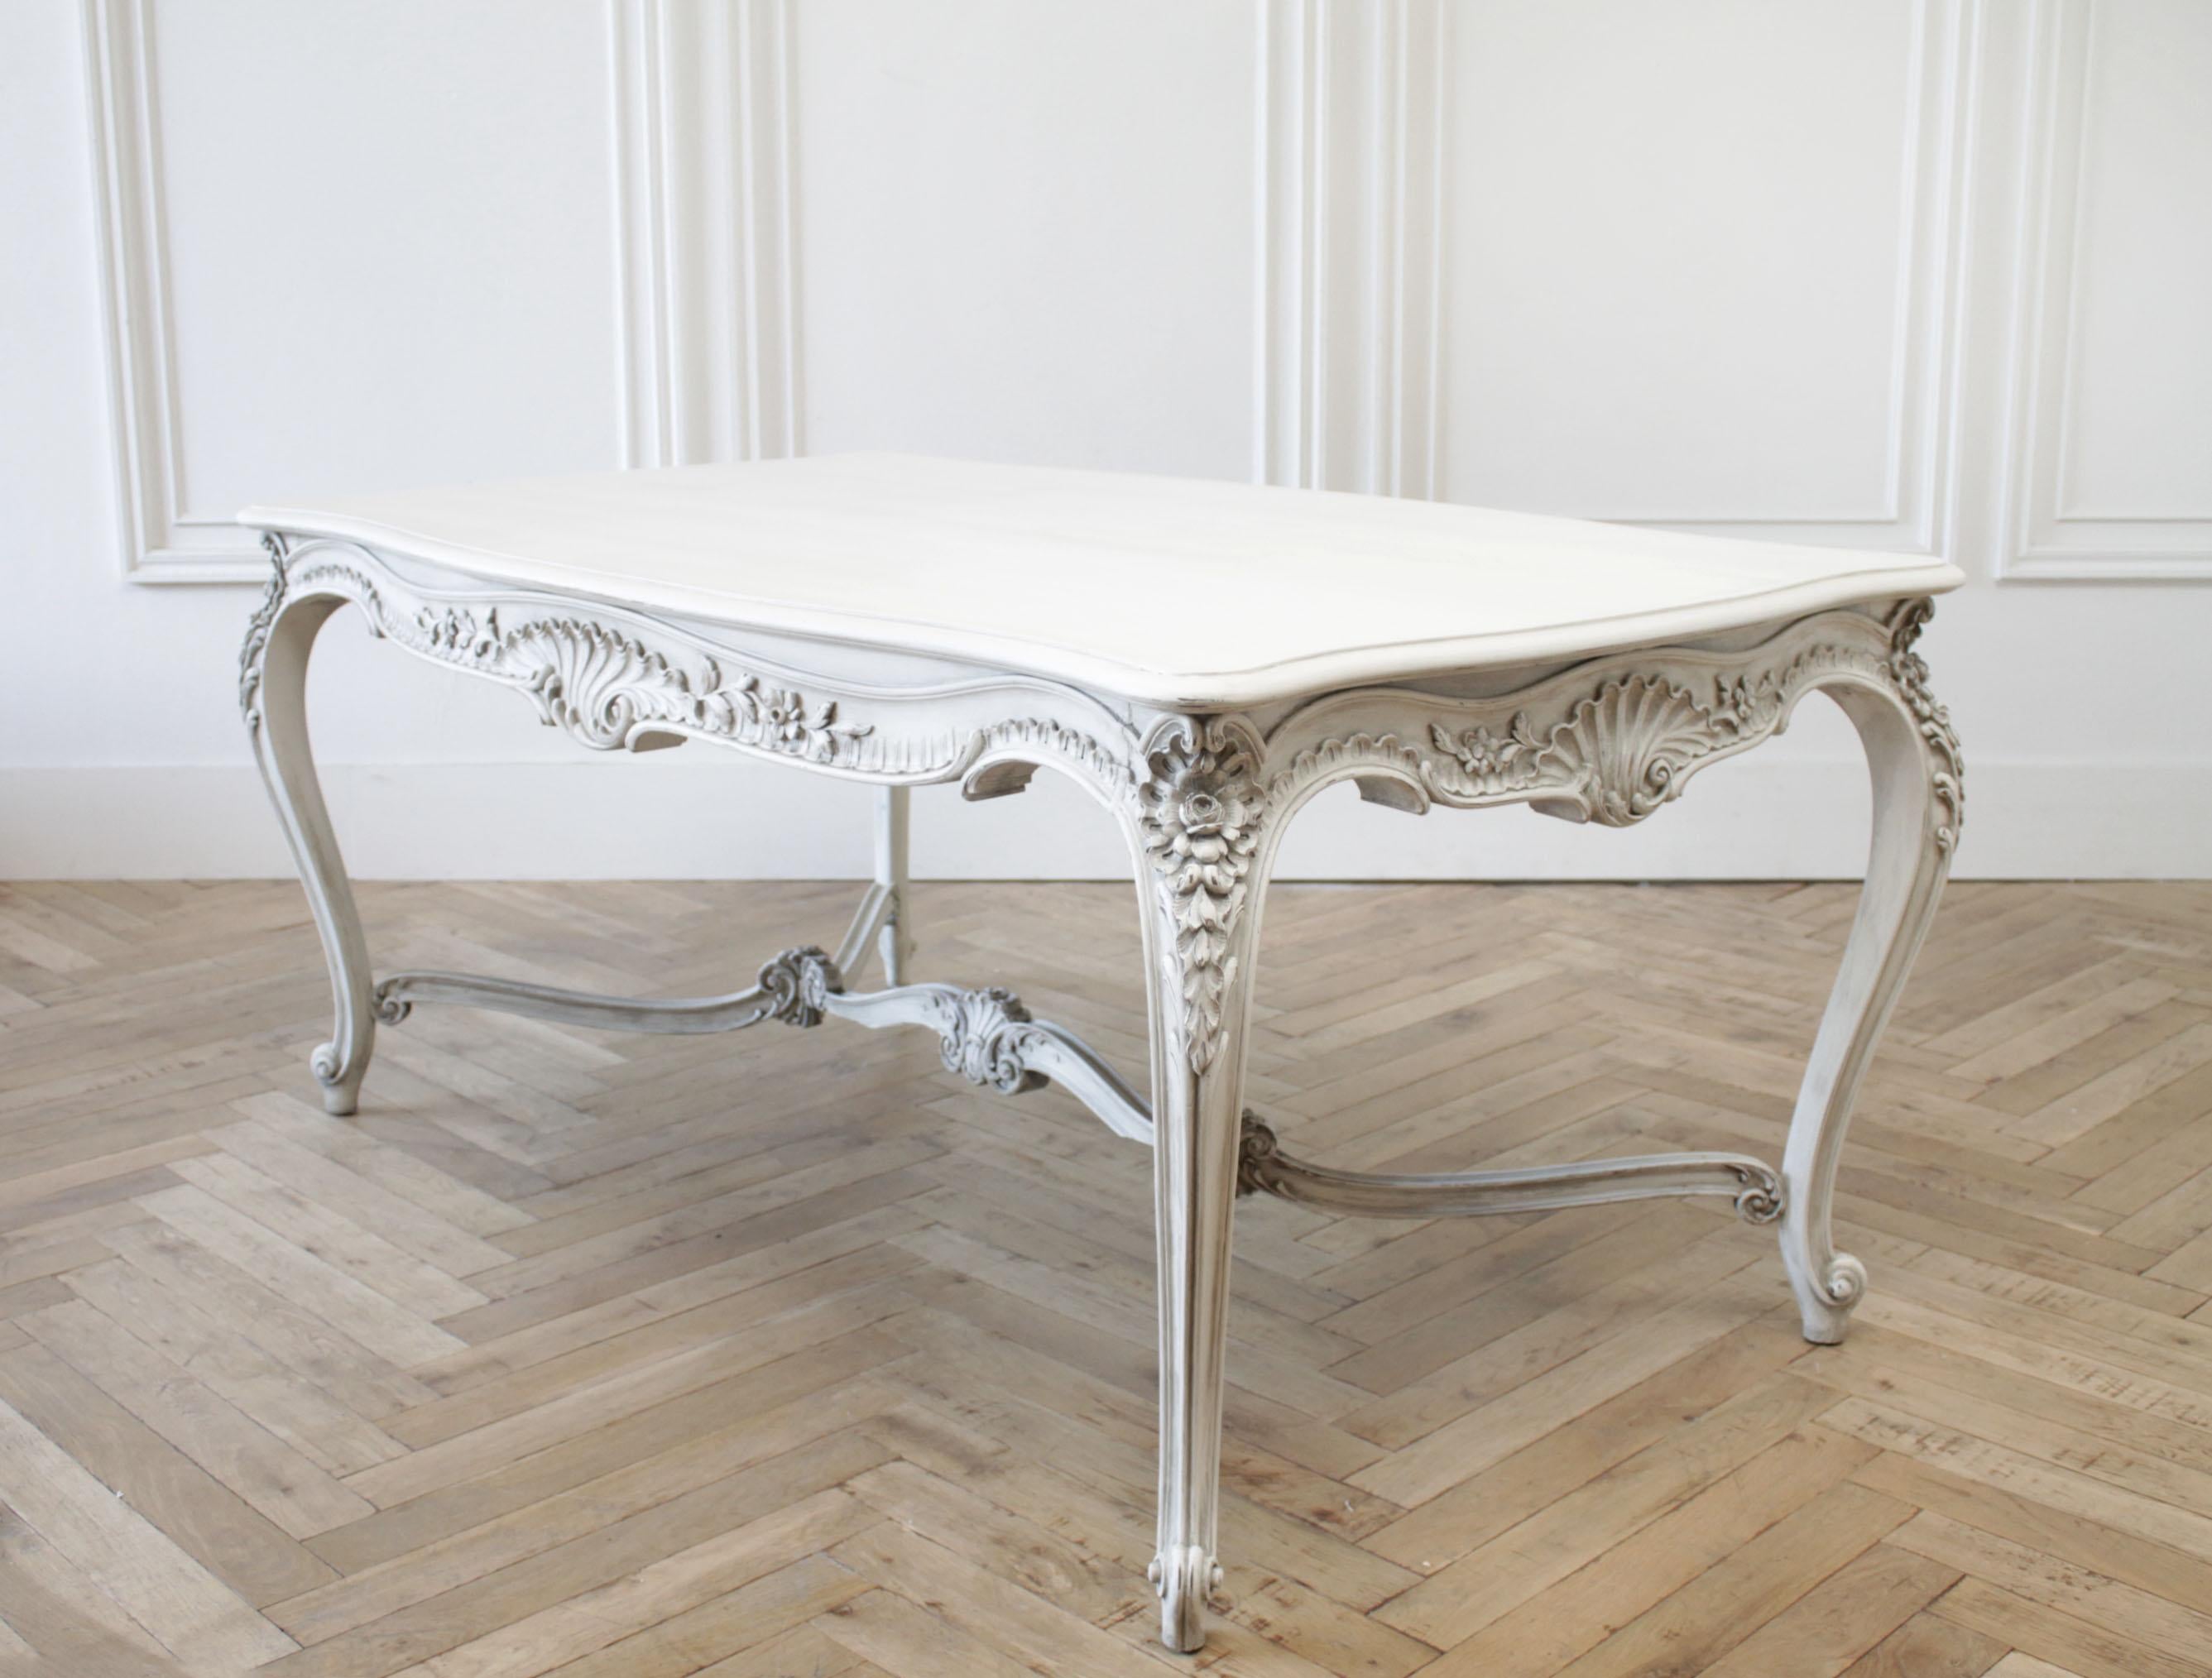 Early 20th century Louis XV carved and painted dining or library table
Painted in a soft oyster white with subtle distressed edges, and antique patina. Beautiful carved apron, and carved stretcher. Great for use as a dining table, library table, or